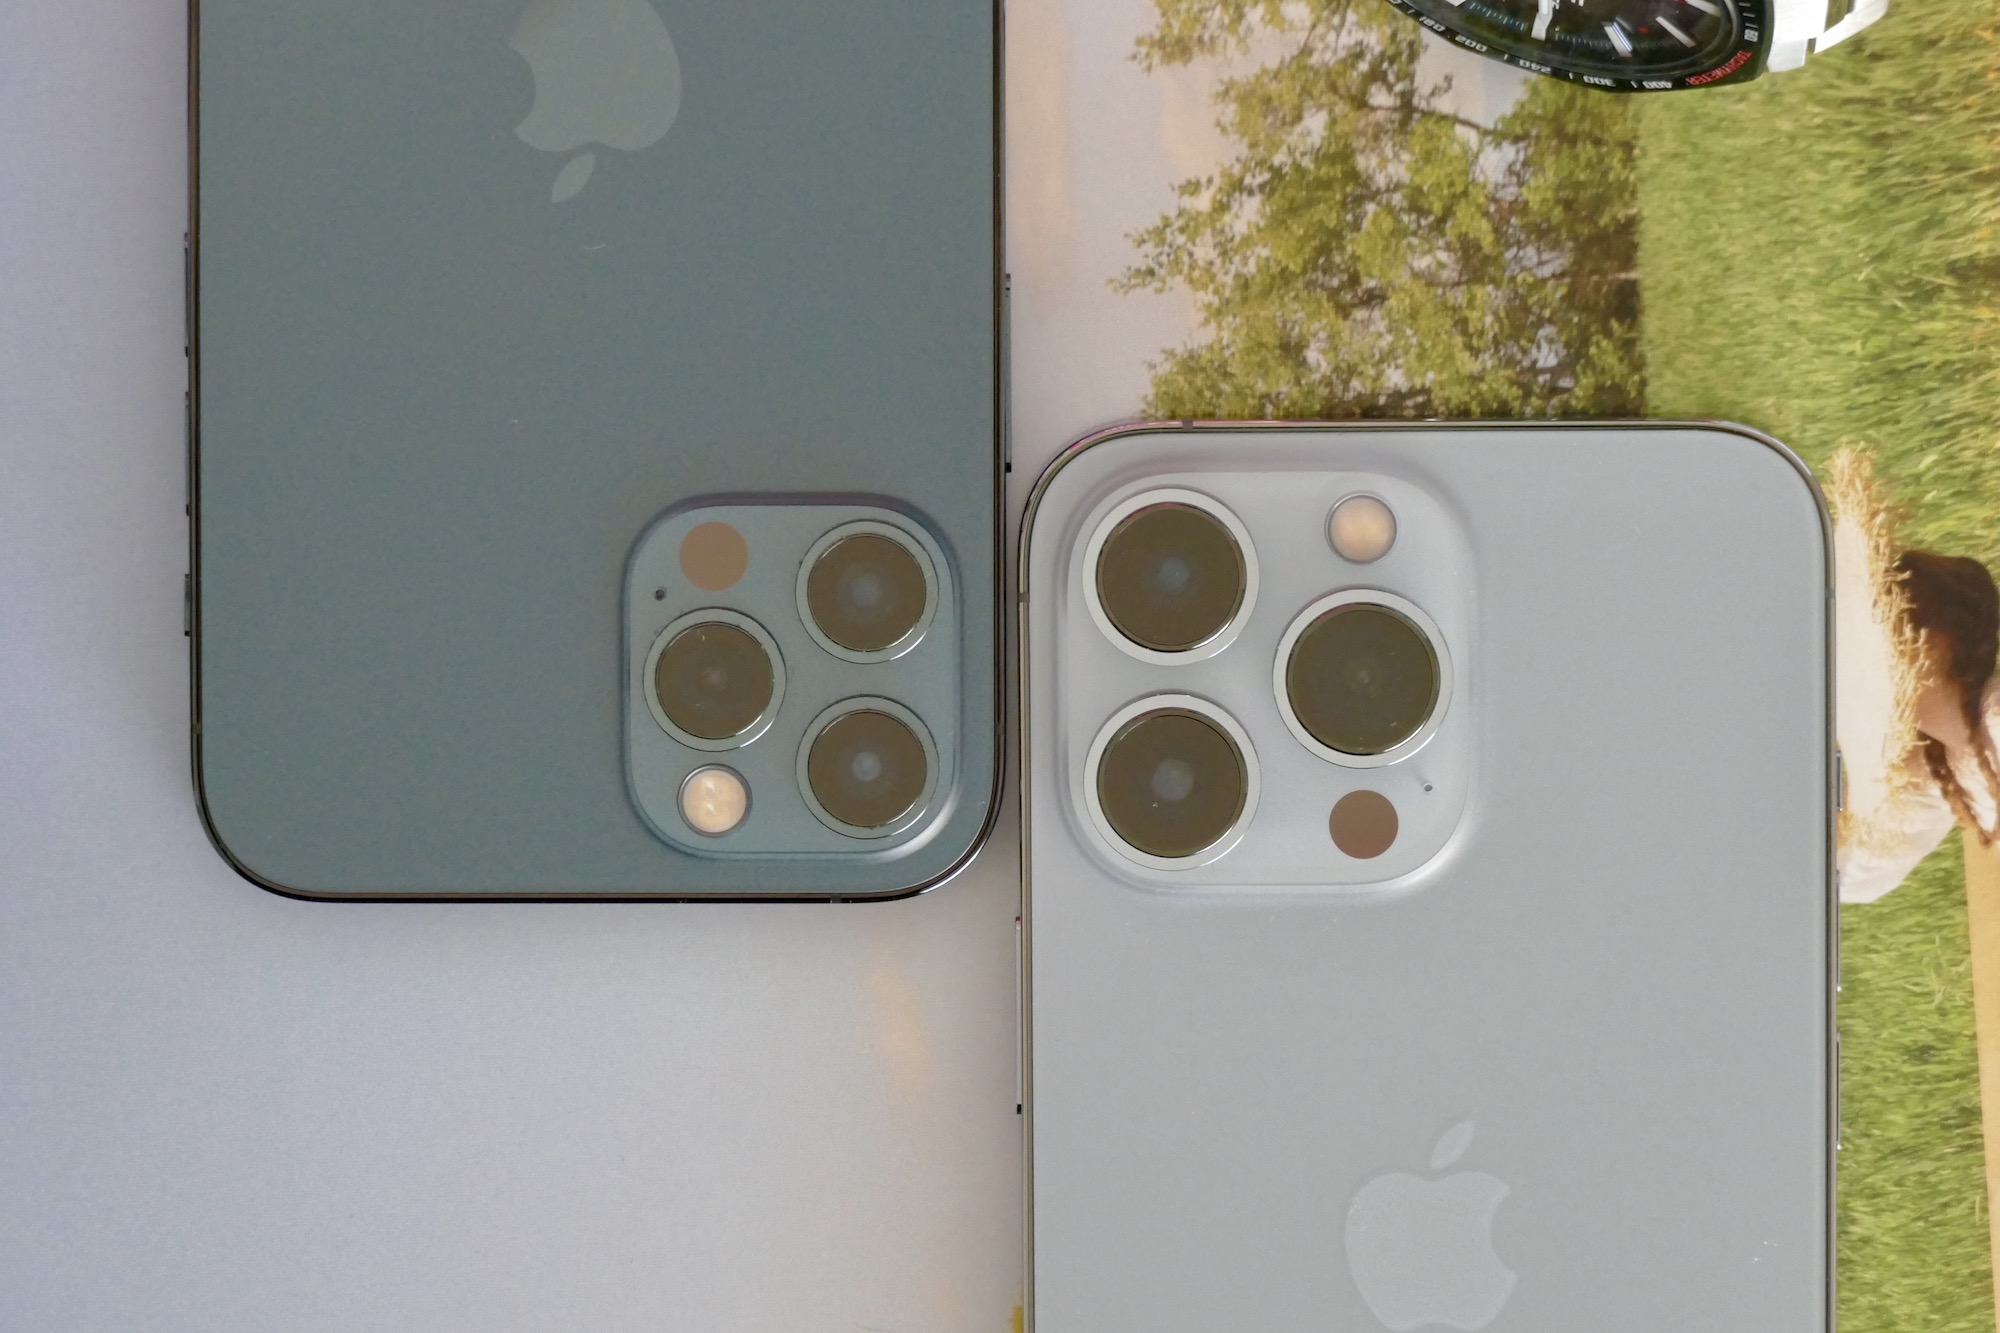 Compared: iPhone 13 Pro and iPhone 13 Pro Max vs iPhone 12 Pro and